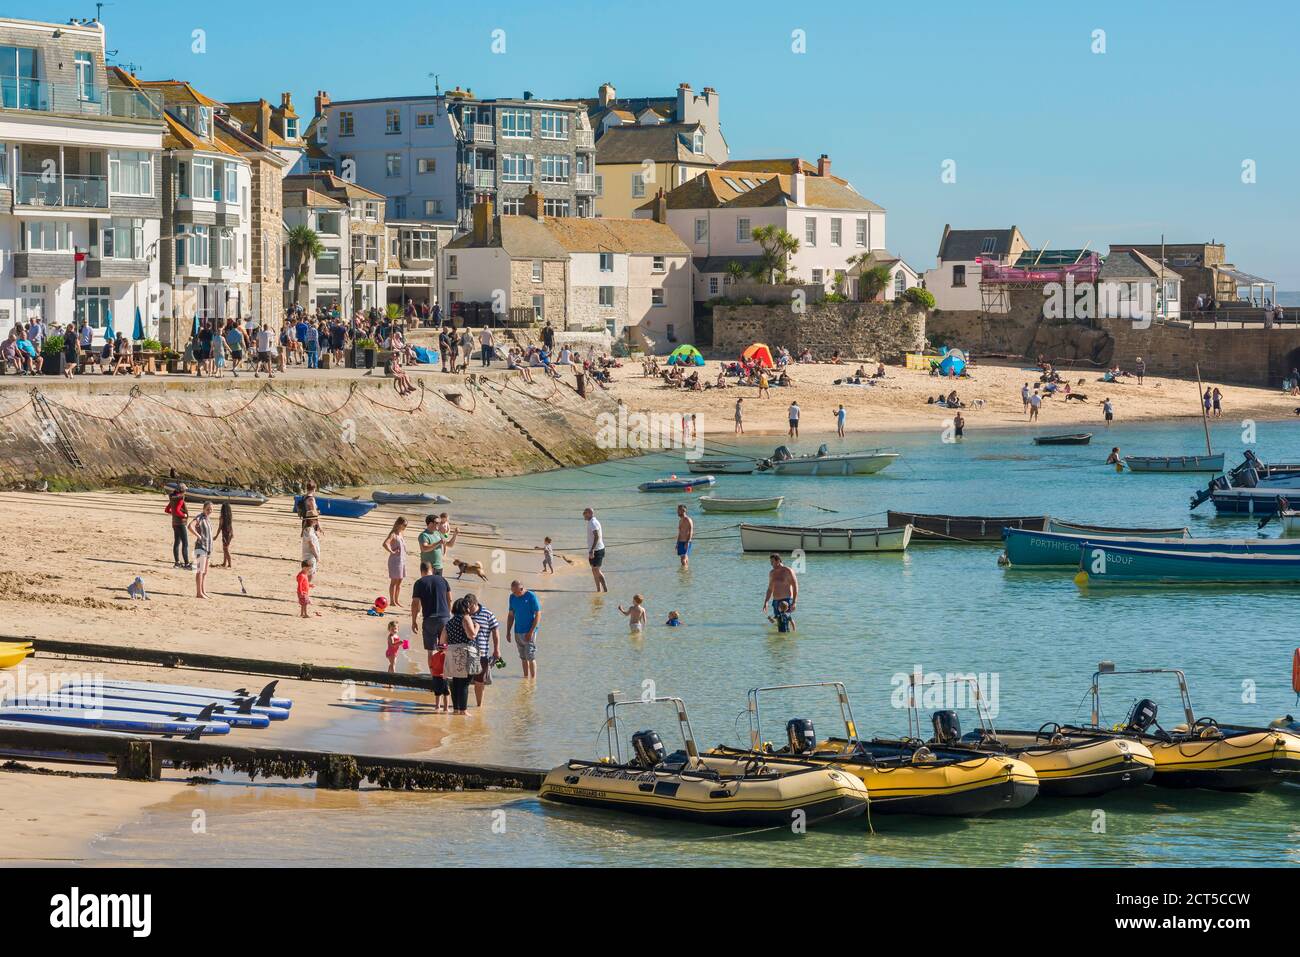 St Ives beach, view in summer of the beach in the harbour area of St Ives, Cornwall, south west England, UK Stock Photo